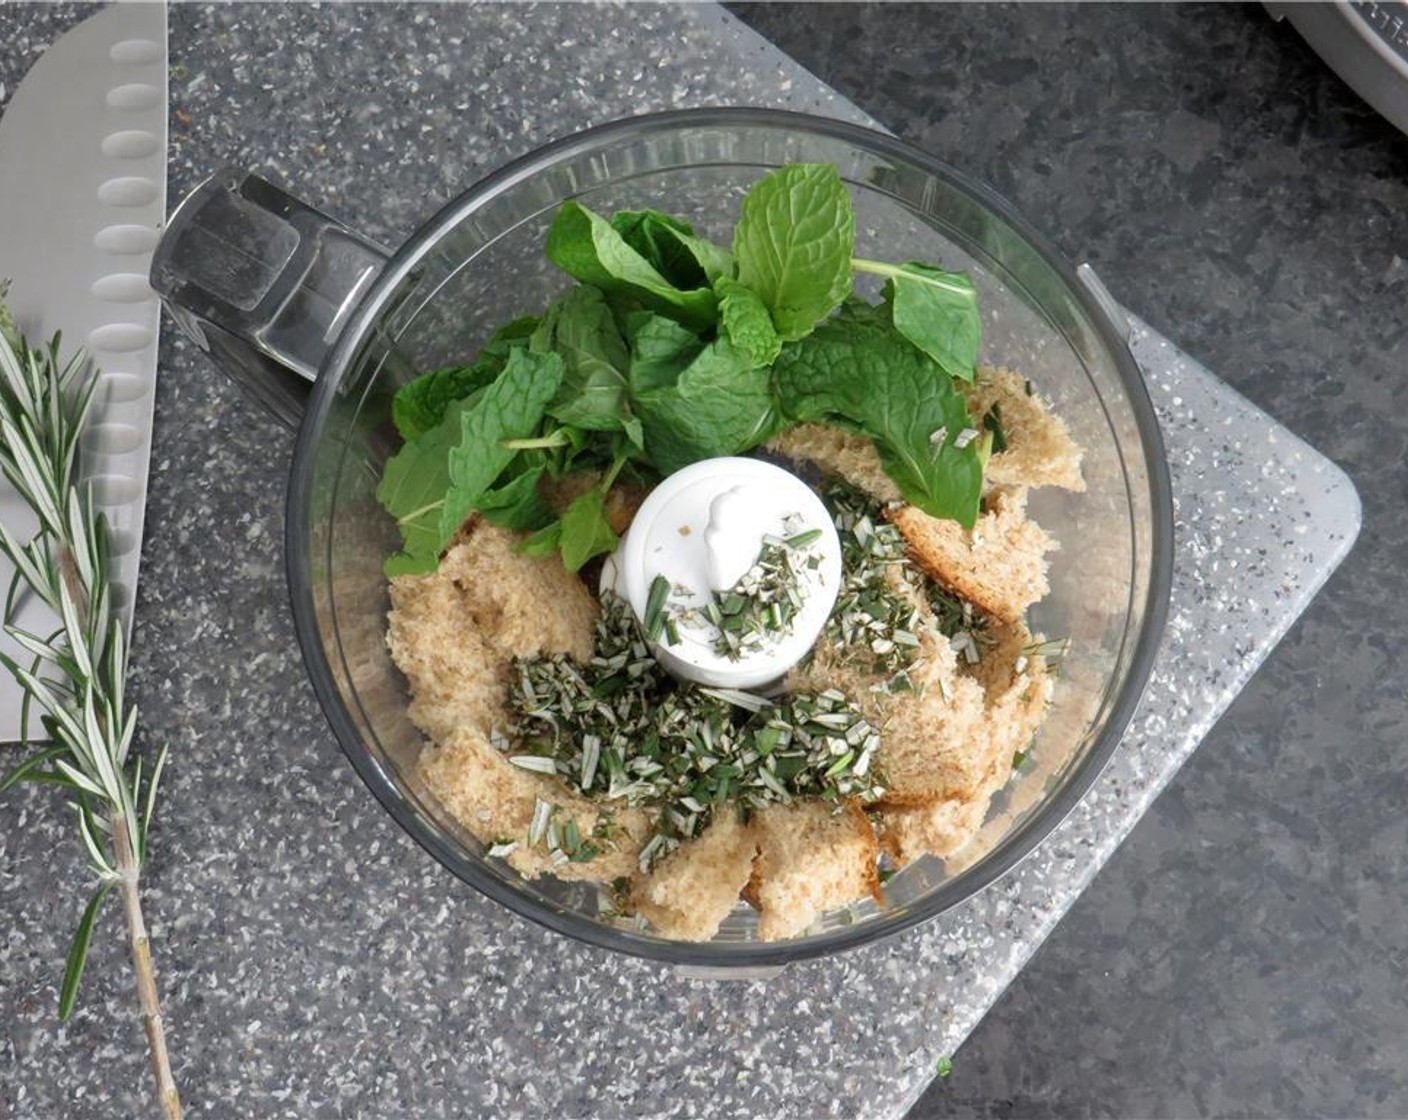 step 1 Preheat oven to 400 degrees F (200 degrees C). Tear the Bread (1 slice) into pieces, and finely chop the Fresh Rosemary (1 Tbsp). In a mini-prep food processor, add bread, Fresh Mint Leaves (1/4 cup) and fresh rosemary. Pulse until fine crumbs are formed.